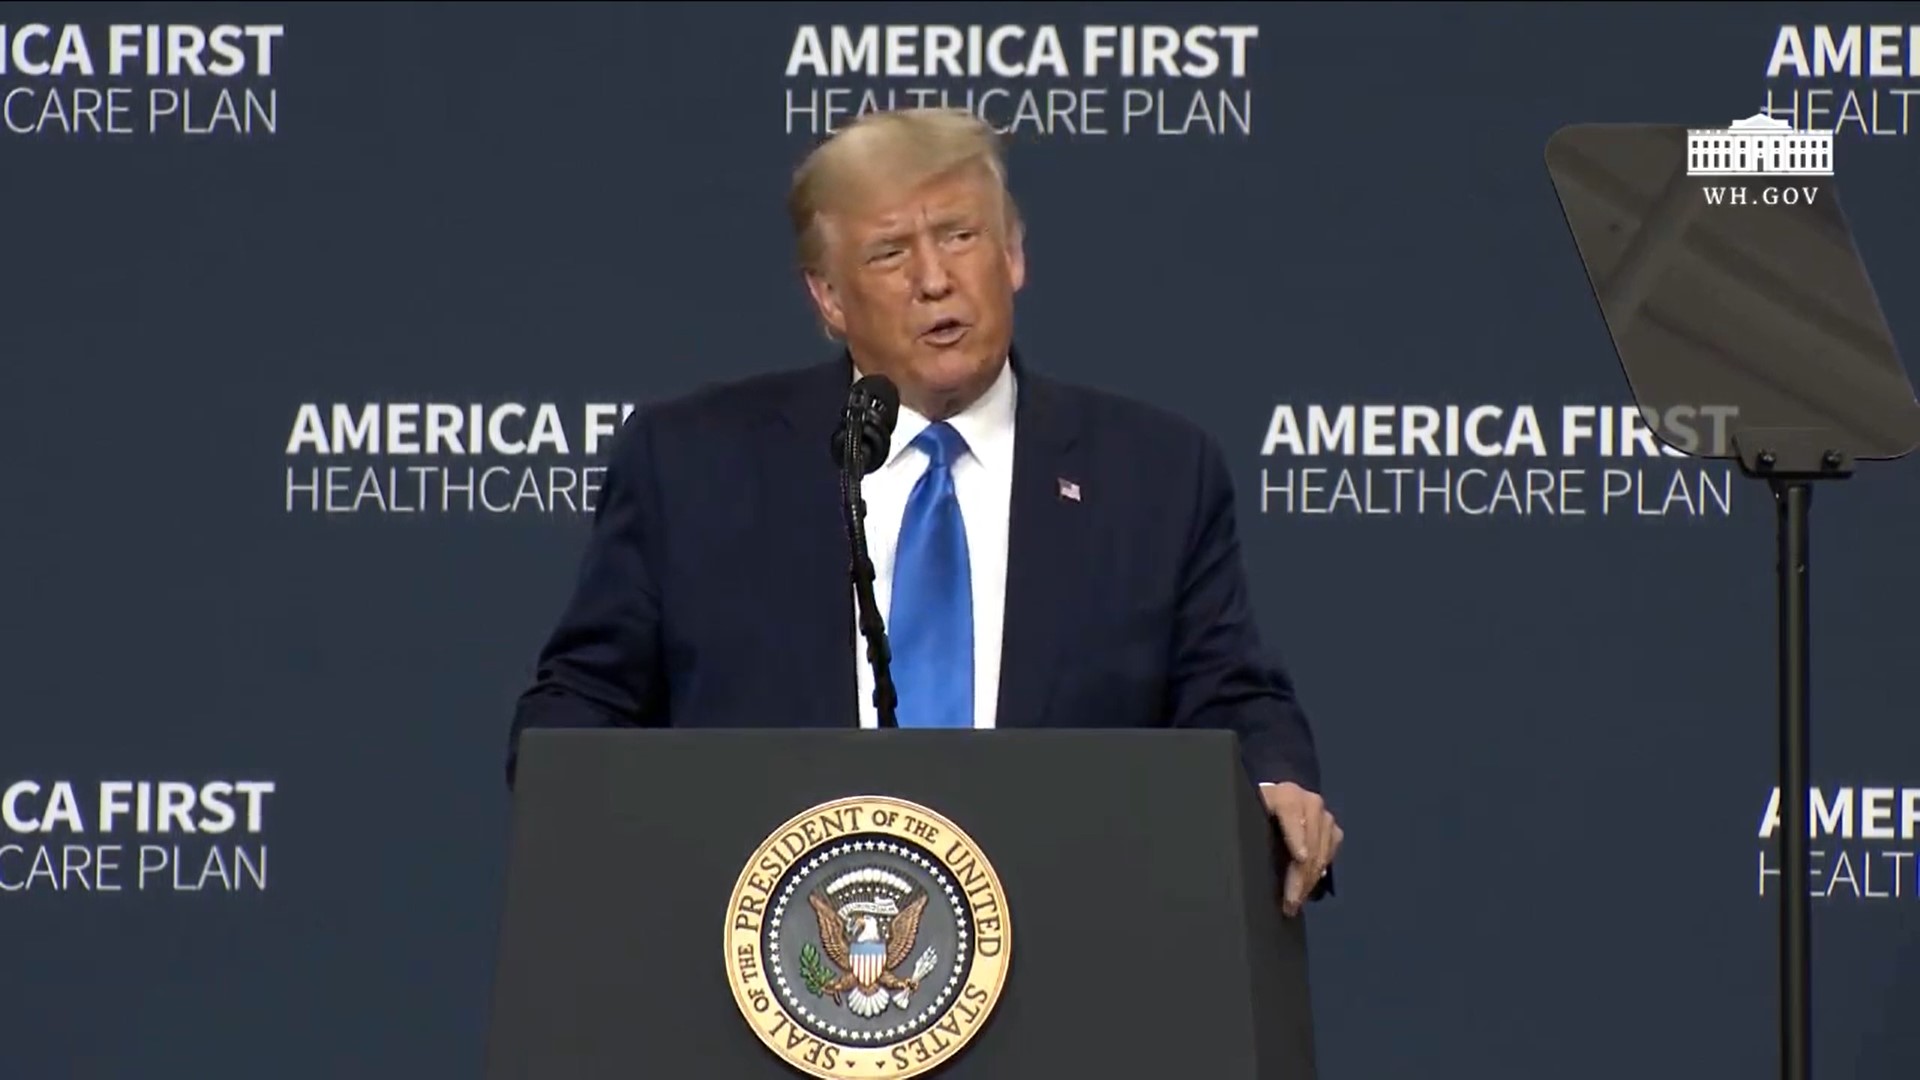 President Donald Trump speaks at an event unveiling healthcare orders